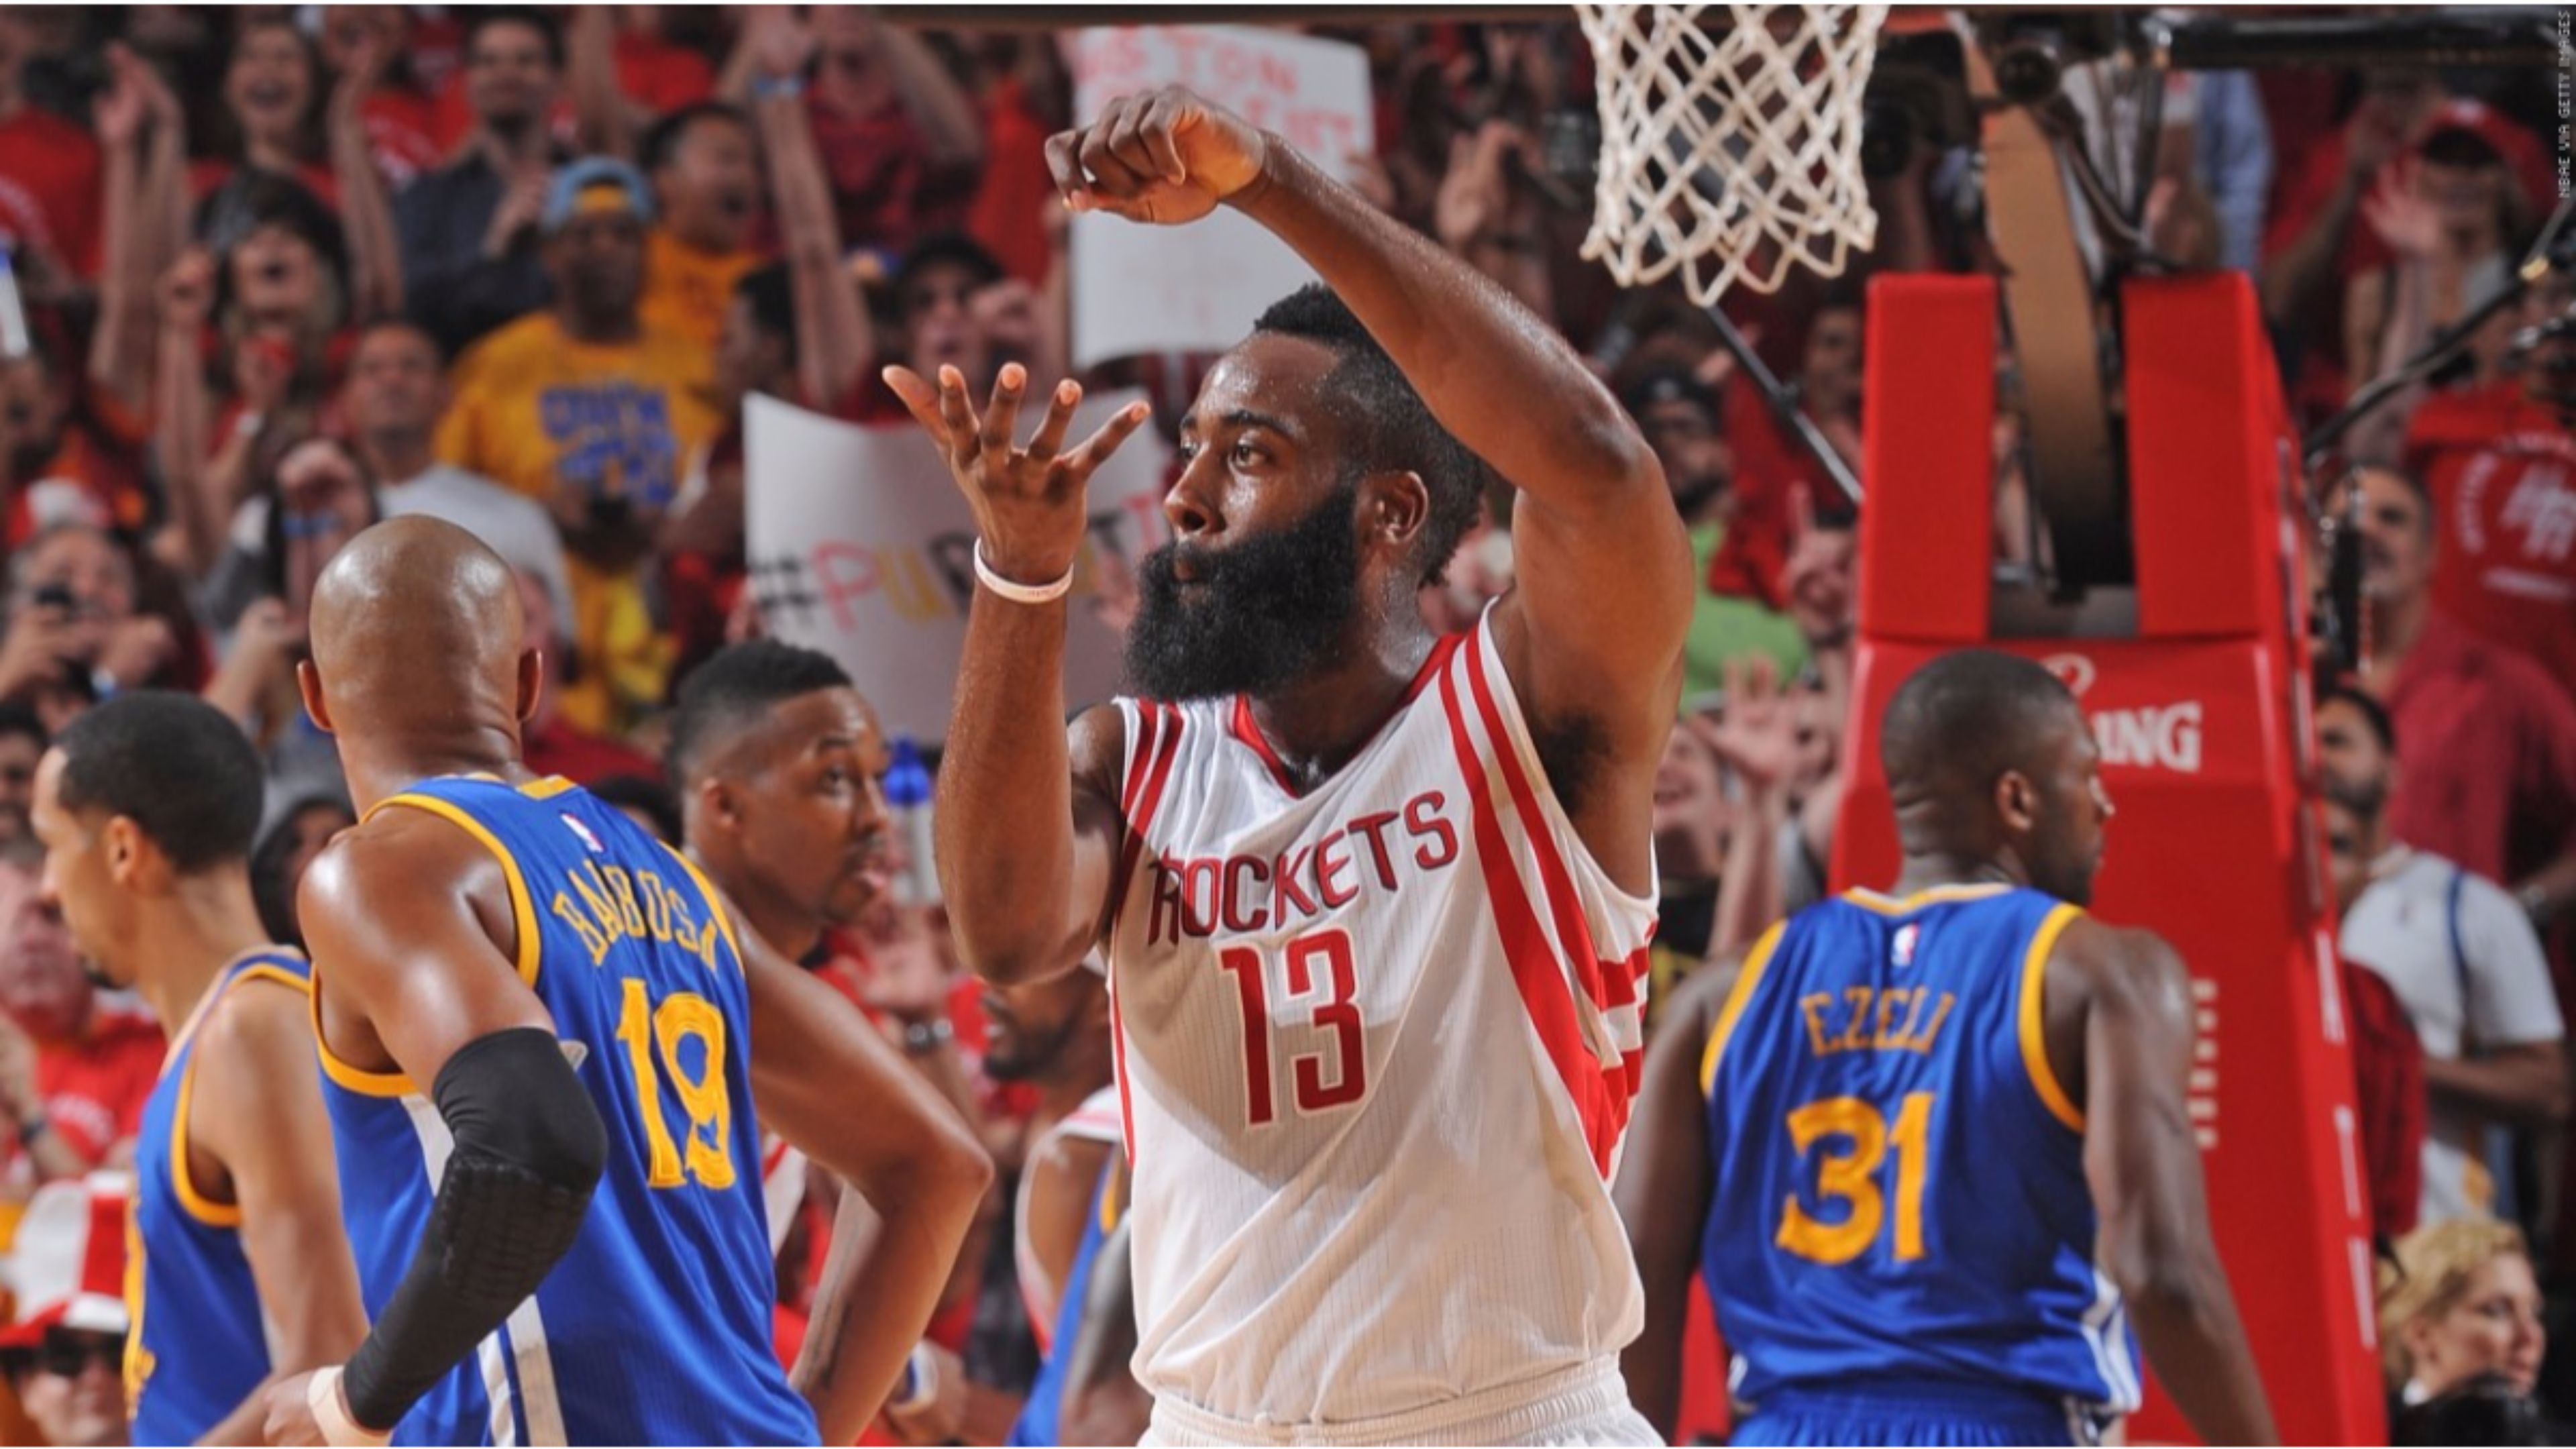 Harden 4K wallpaper for your desktop or mobile screen free and easy to download